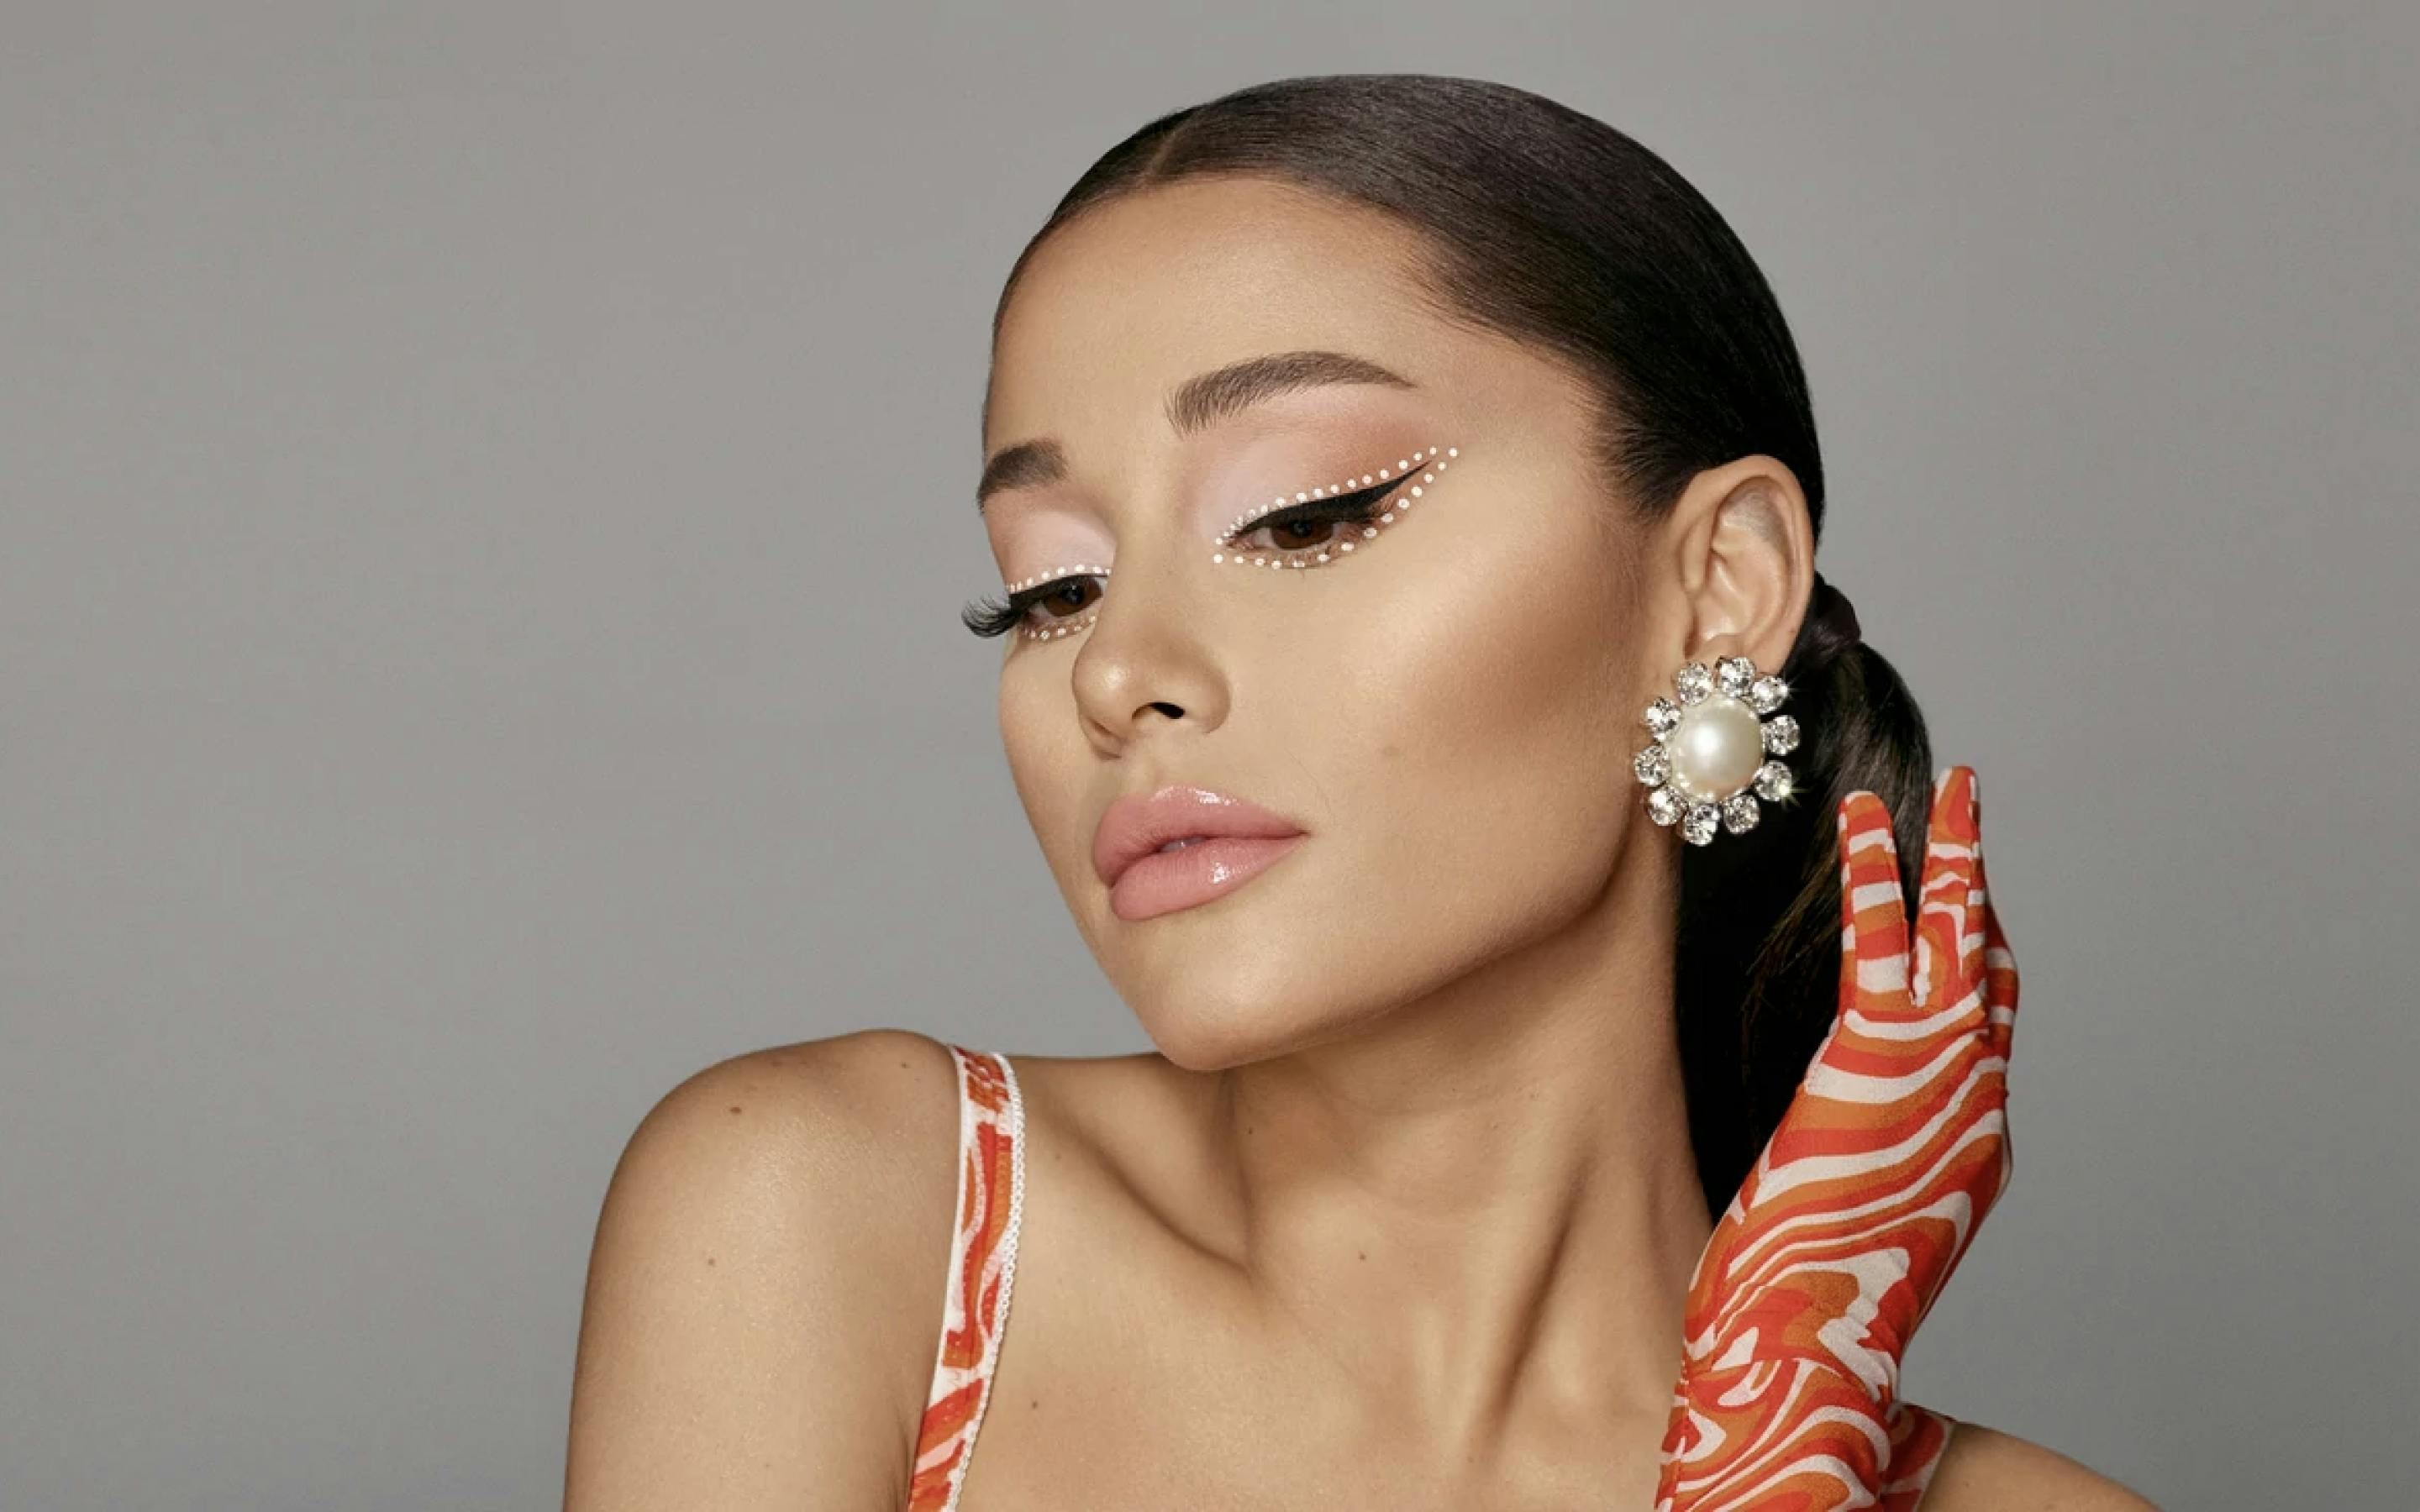 Ariana Grande wearing r.e.m. beauty products